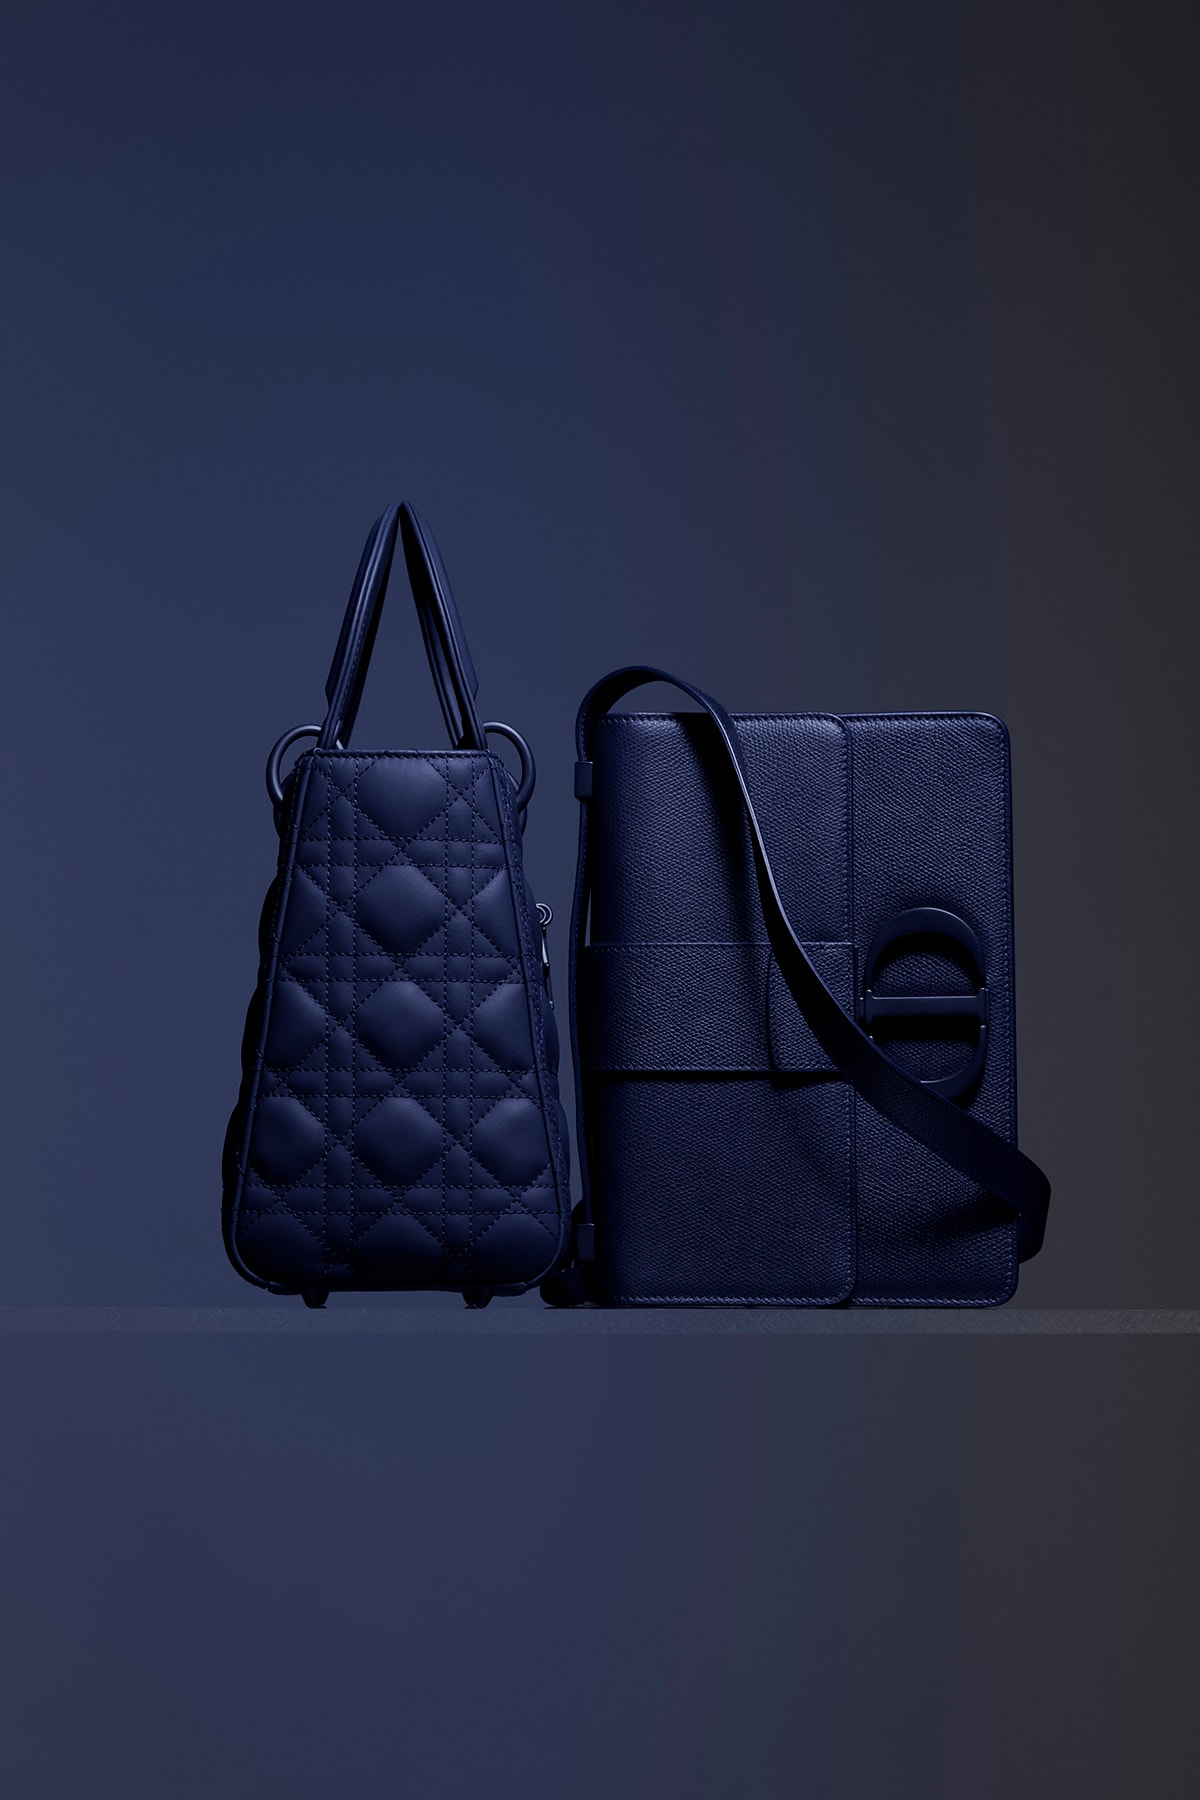 Dior Ultra-Matte Collection Bags Lady Dior Blue